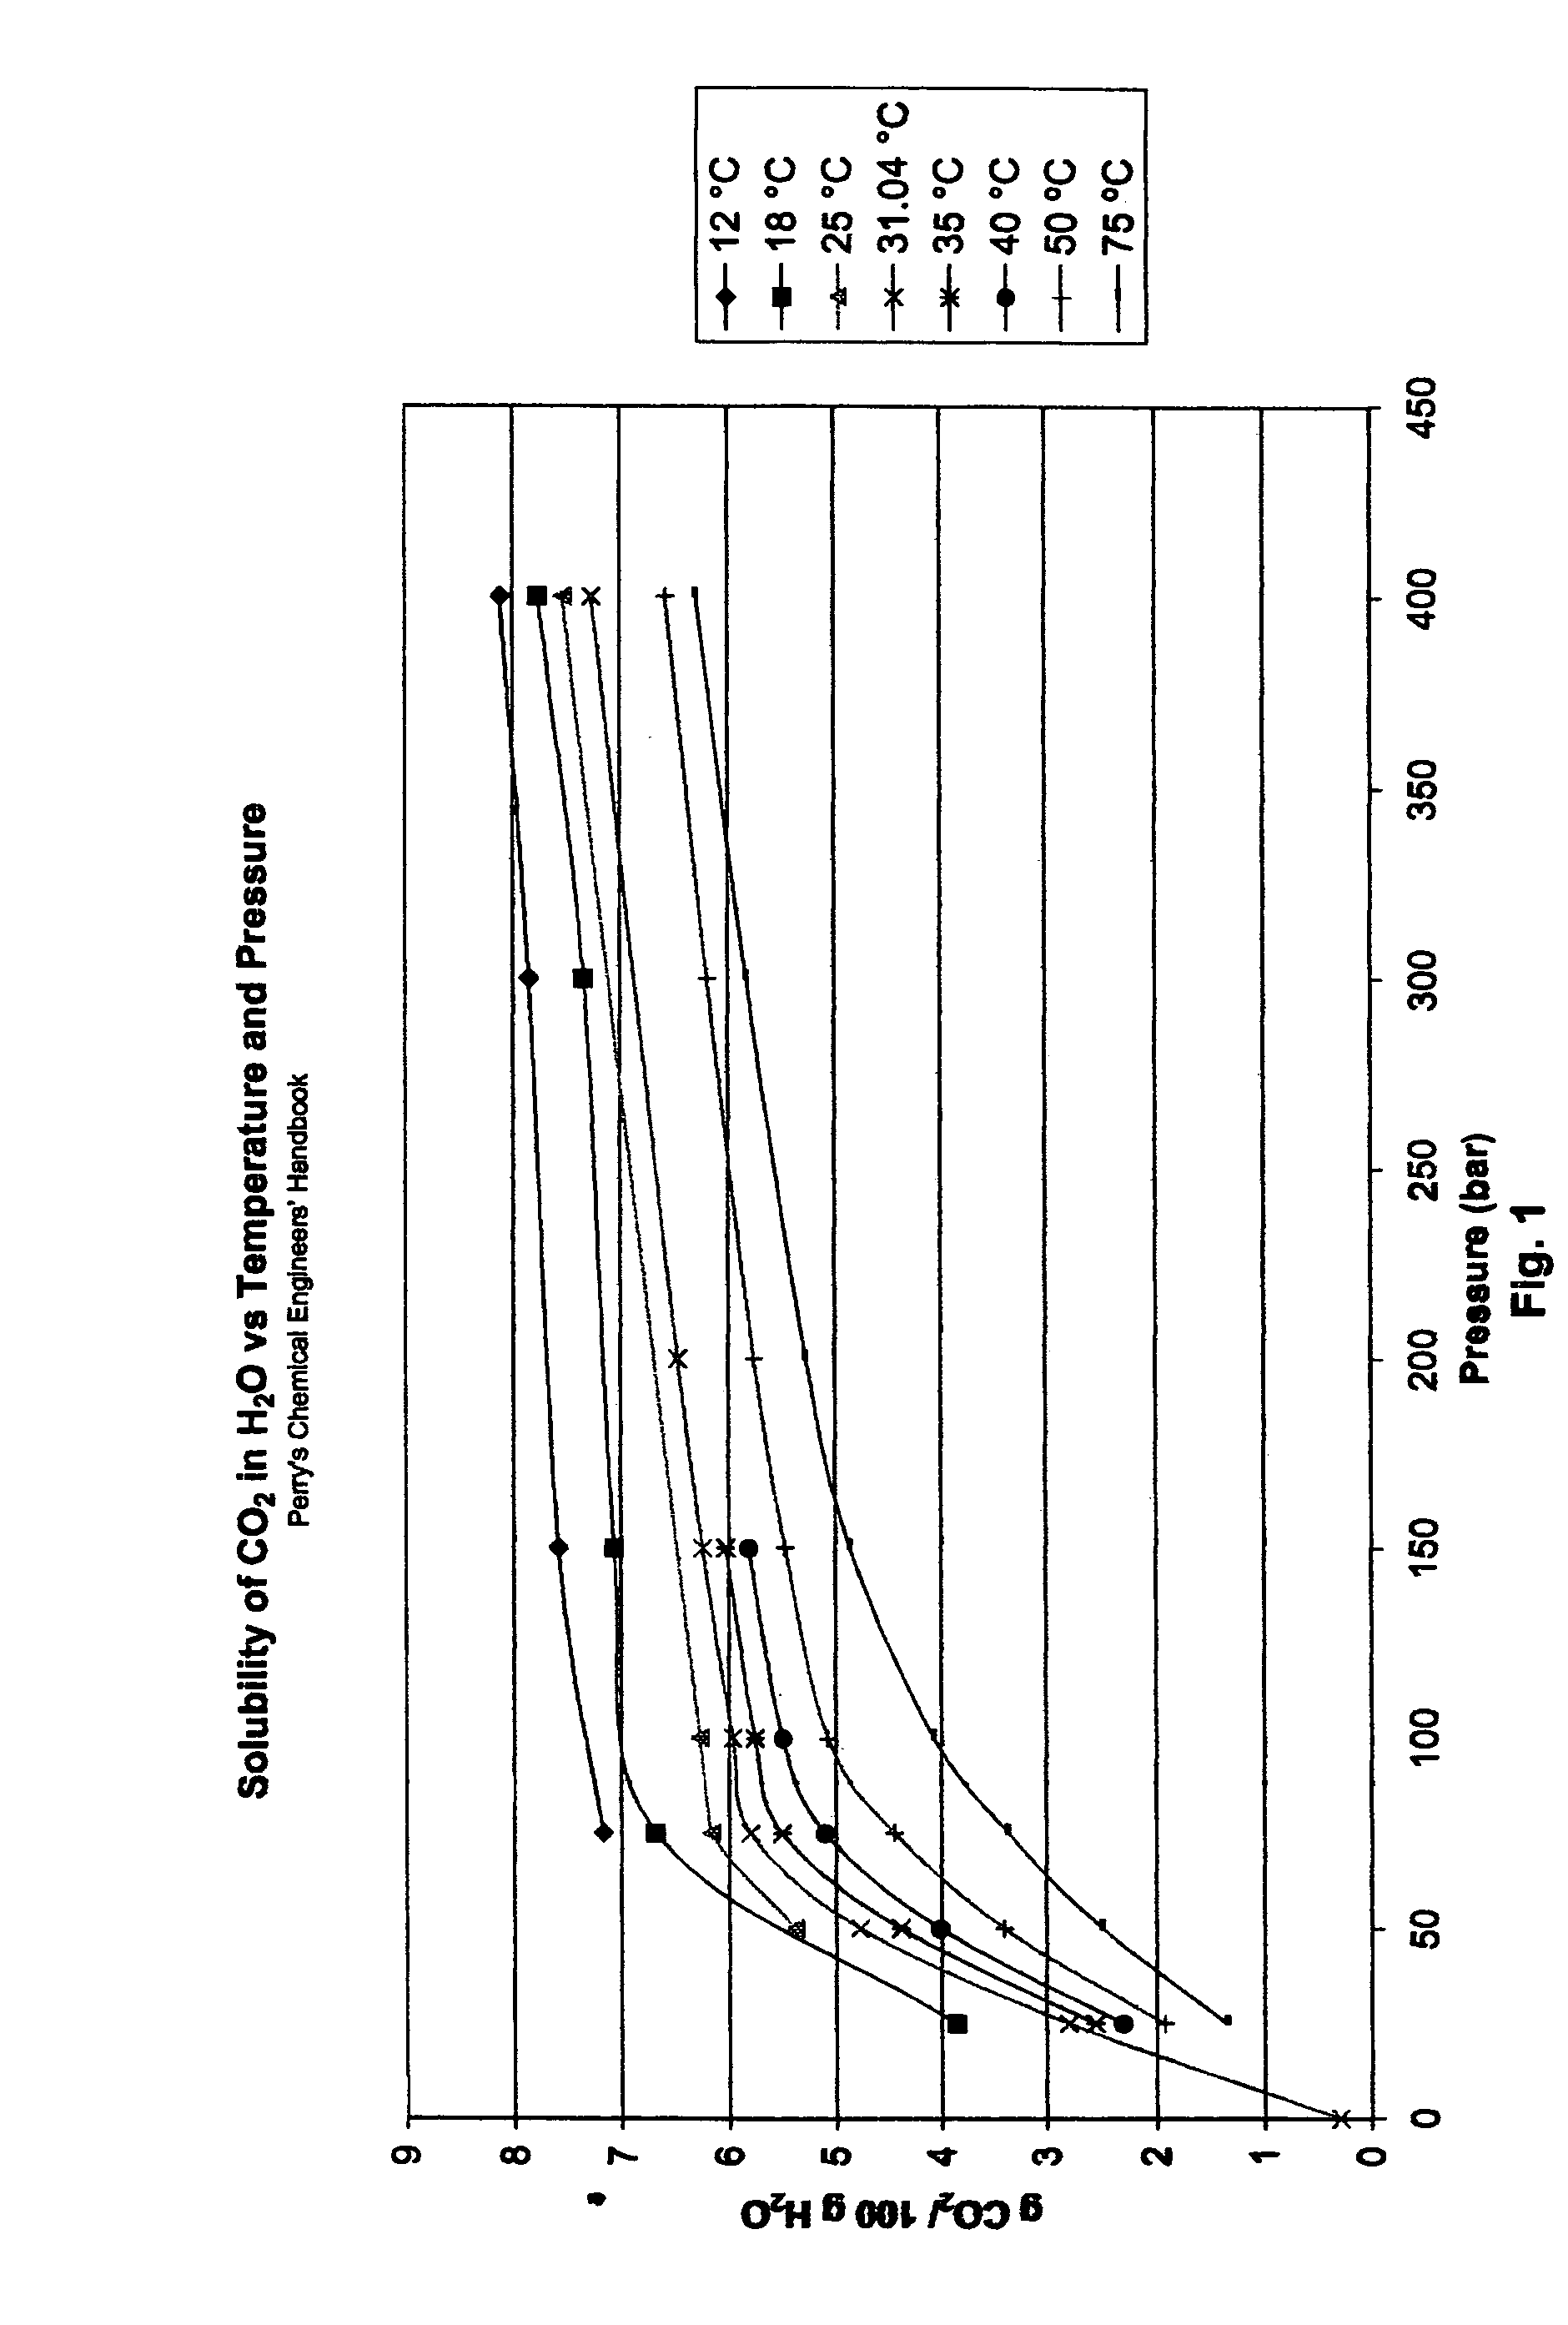 Method for sterilizing articles using carbonated water